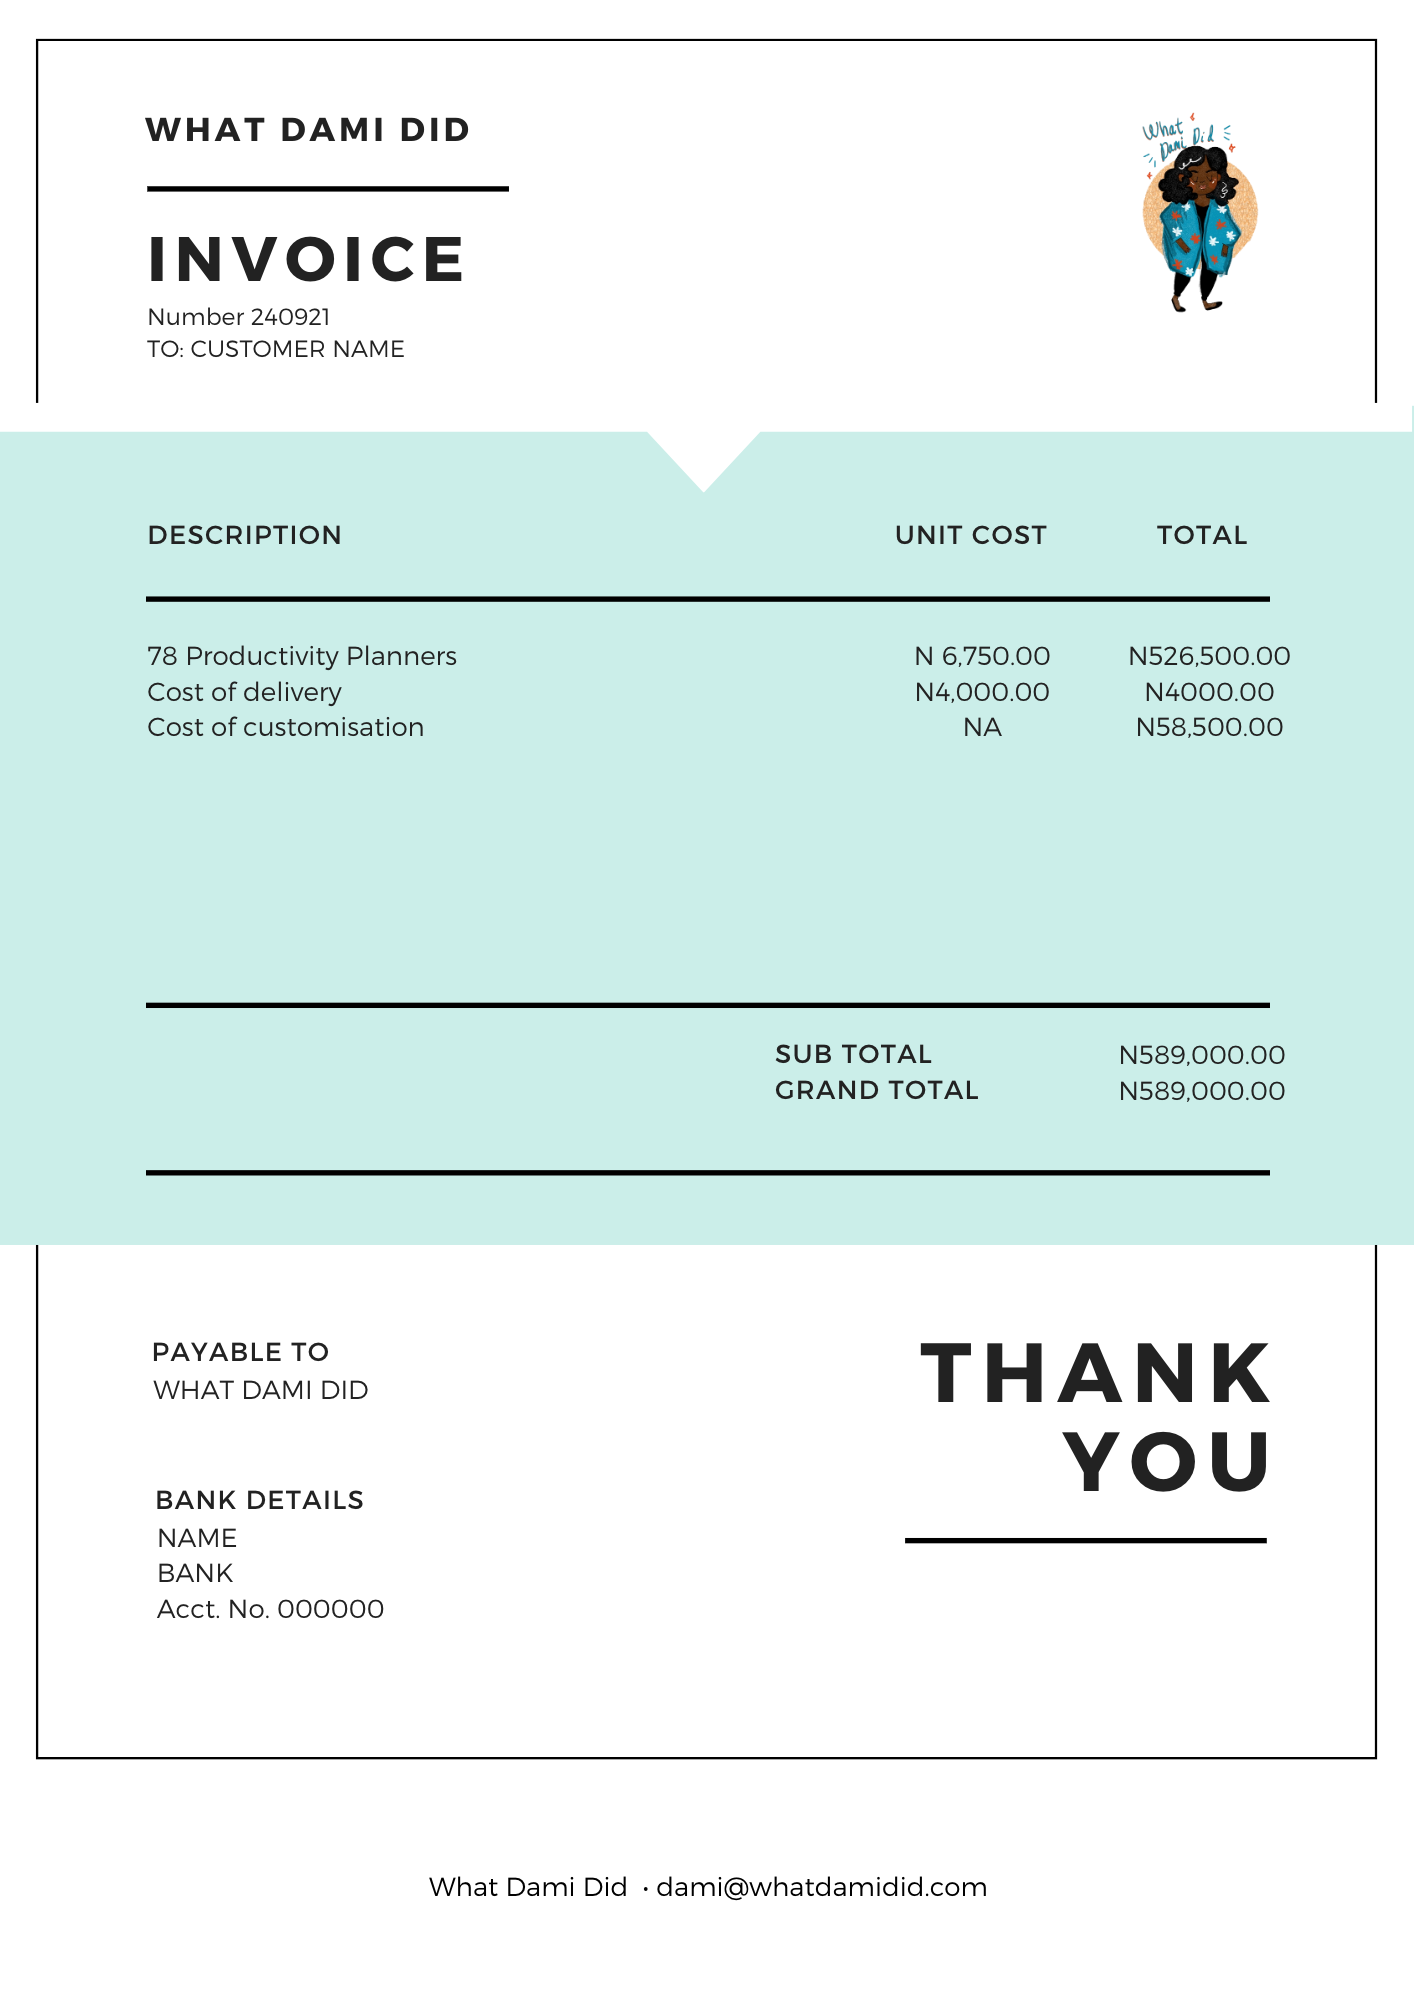 INVOICE TEMPLATE.png